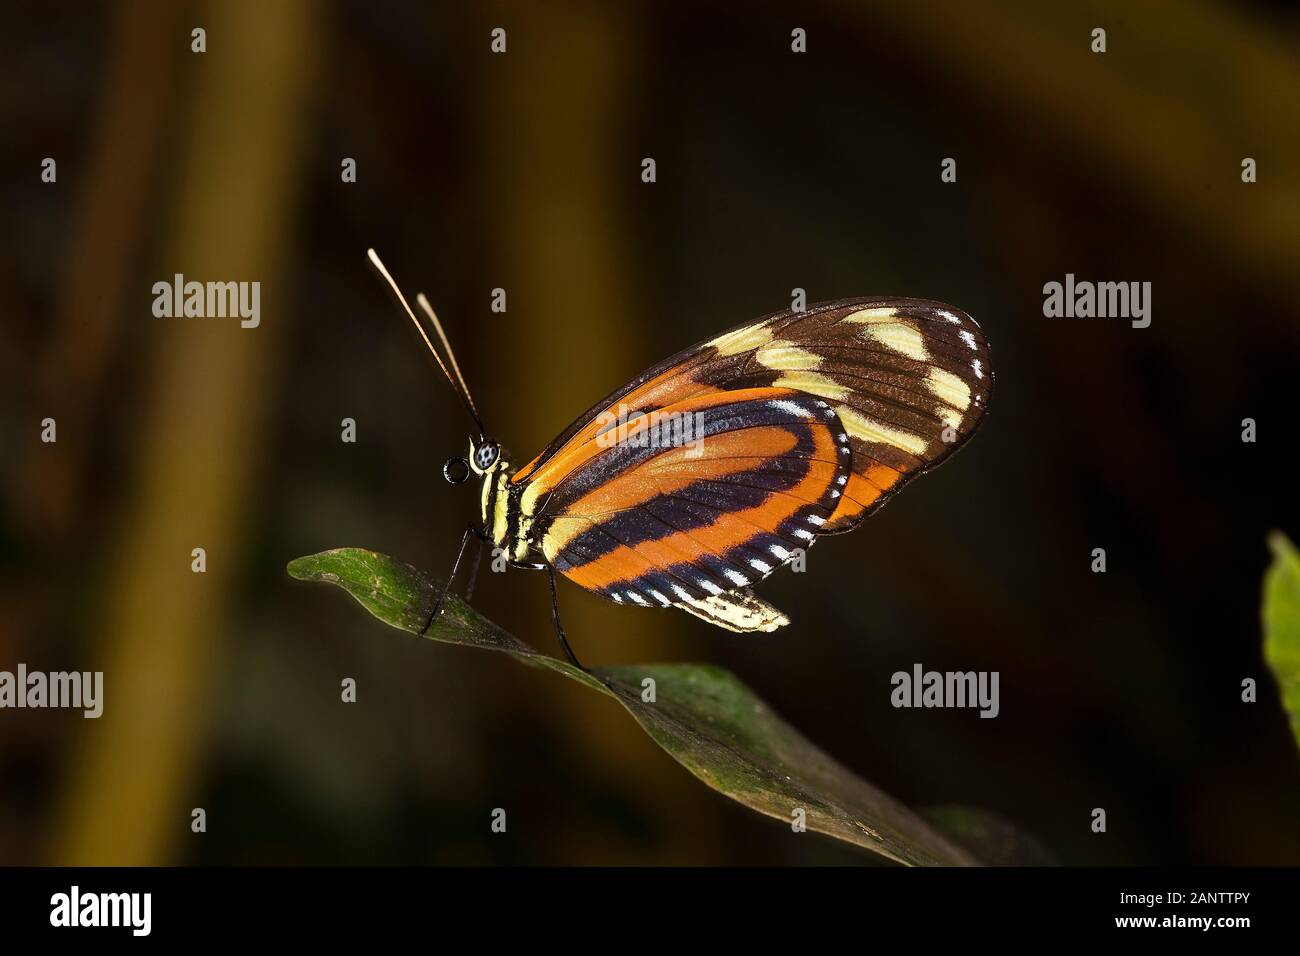 Eueides butterfly, eueides isabella, Adult standing on Leaf Stock Photo